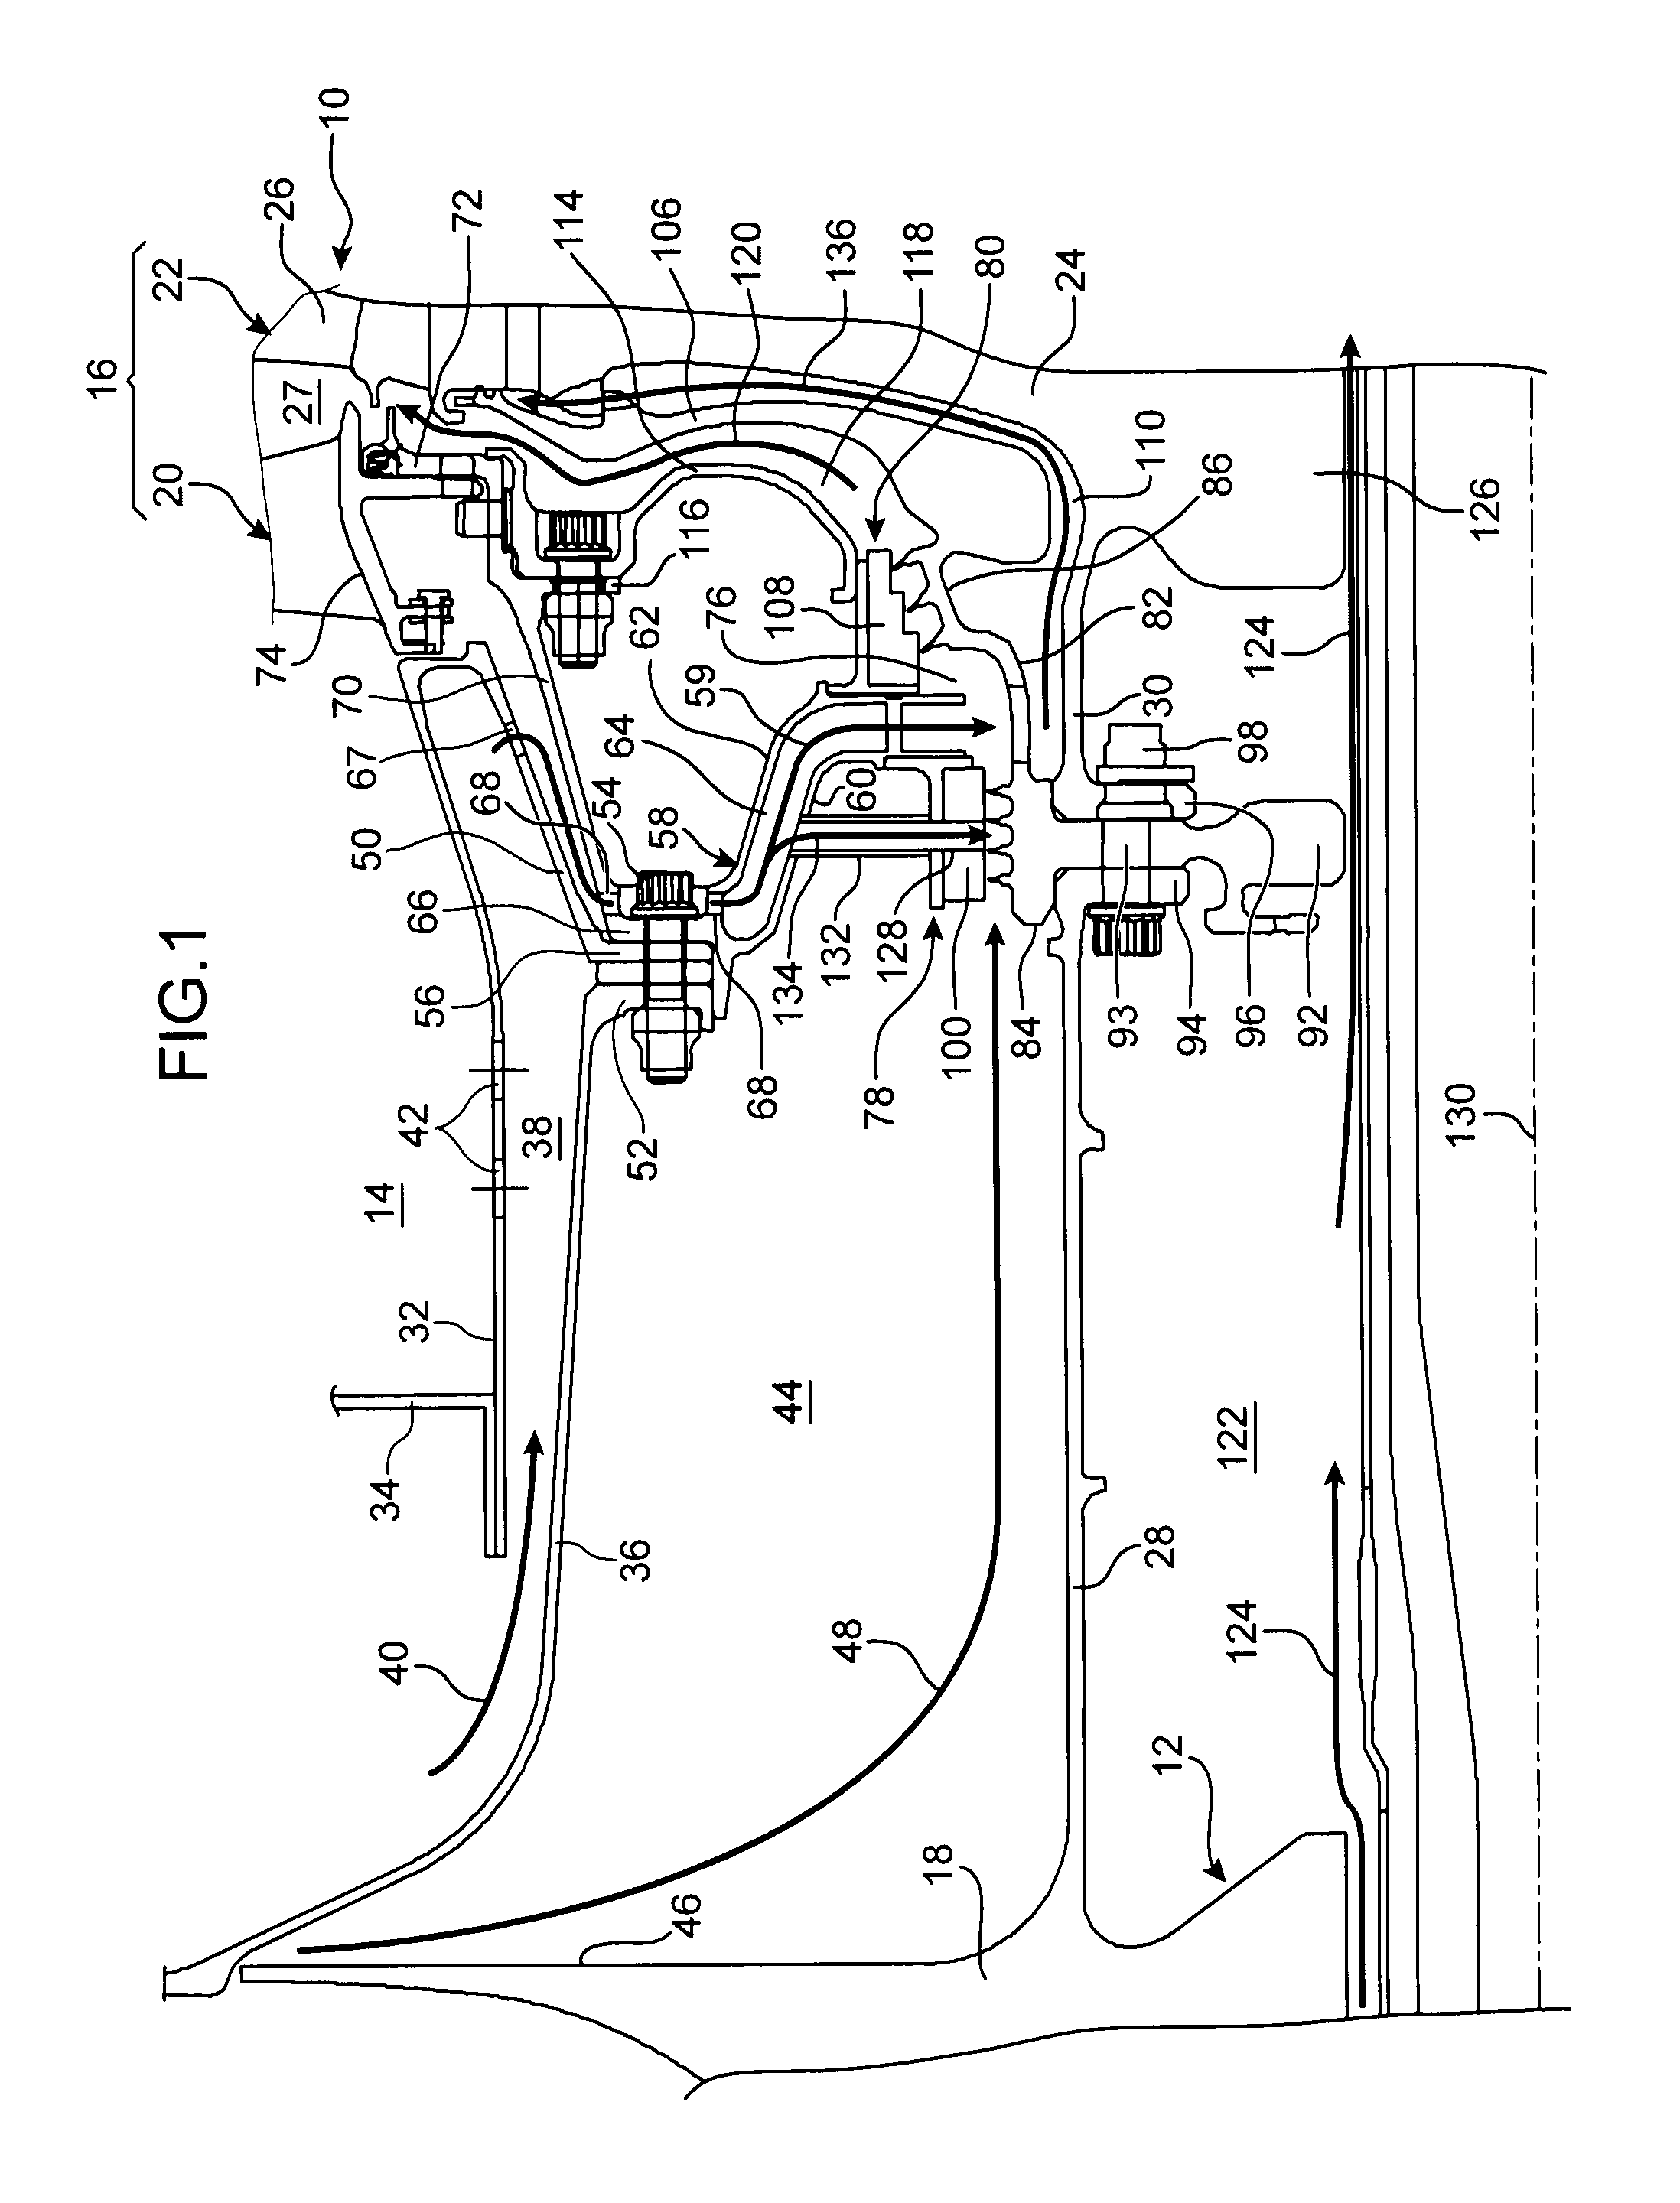 Turbine engine including an improved means for adjusting the flow rate of a cooling air flow sampled at the output of a high-pressure compressor